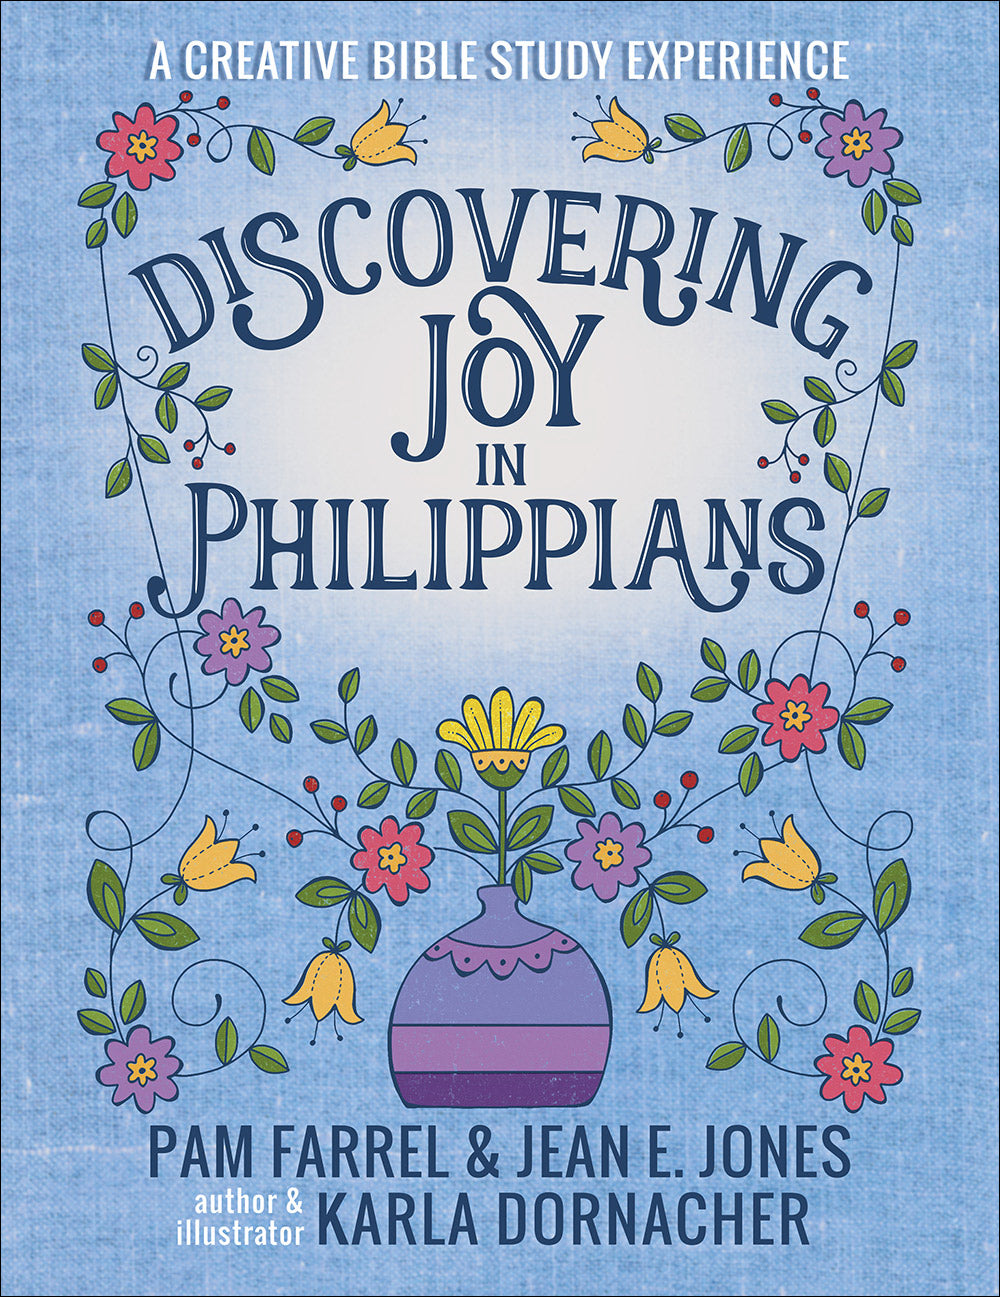 Image of Discovering Joy in Philippians other